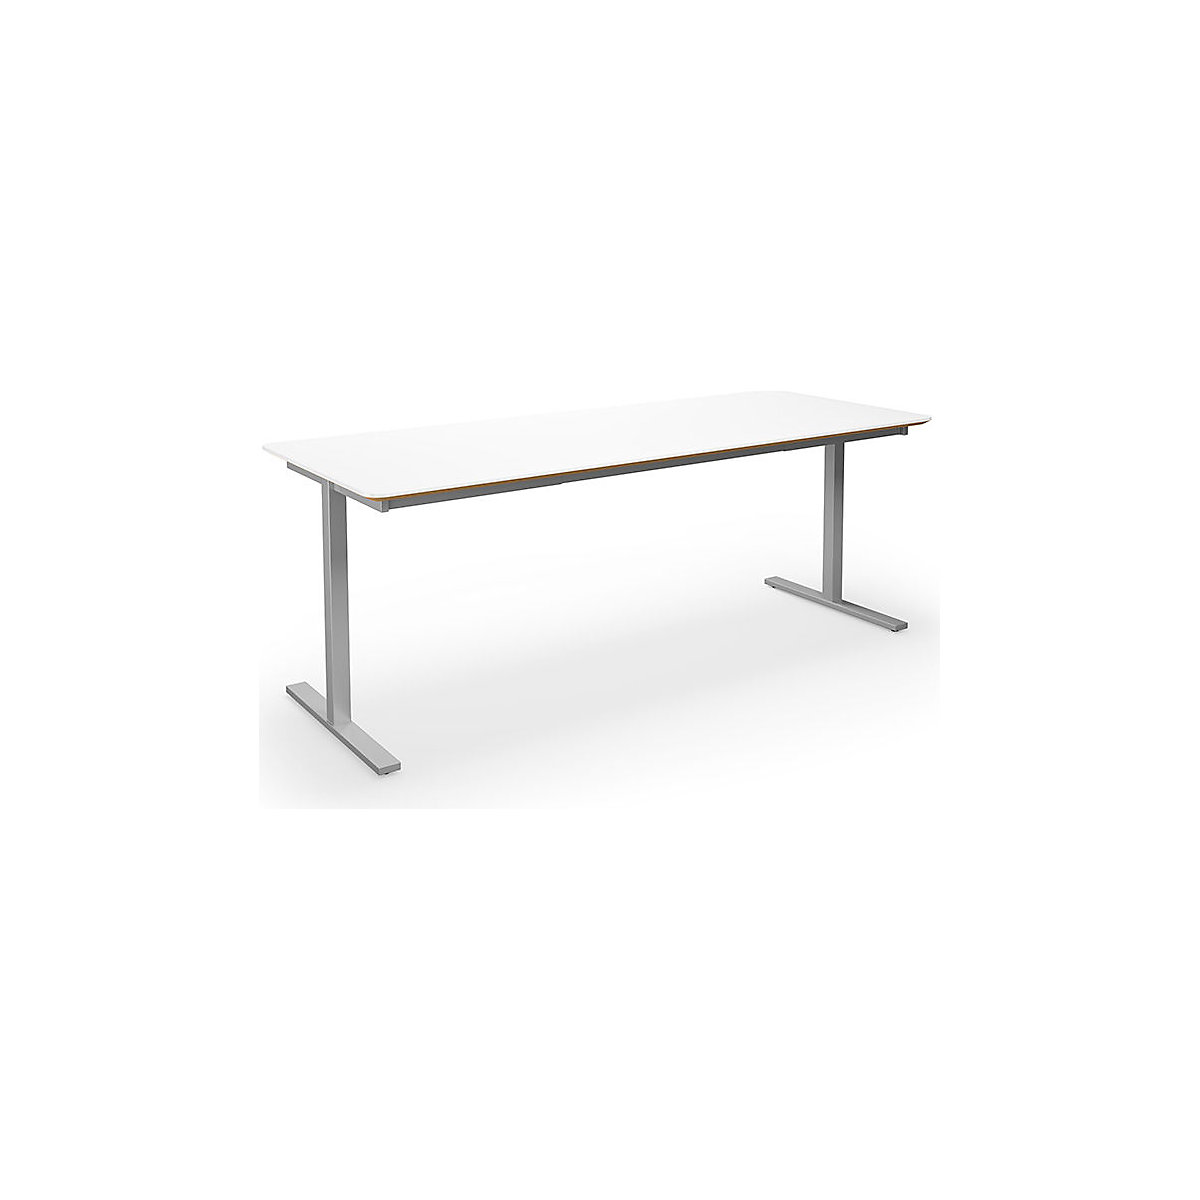 DUO-T Trend multi-purpose desk, straight tabletop, rounded corners, WxD 1800 x 800 mm, white, silver-2